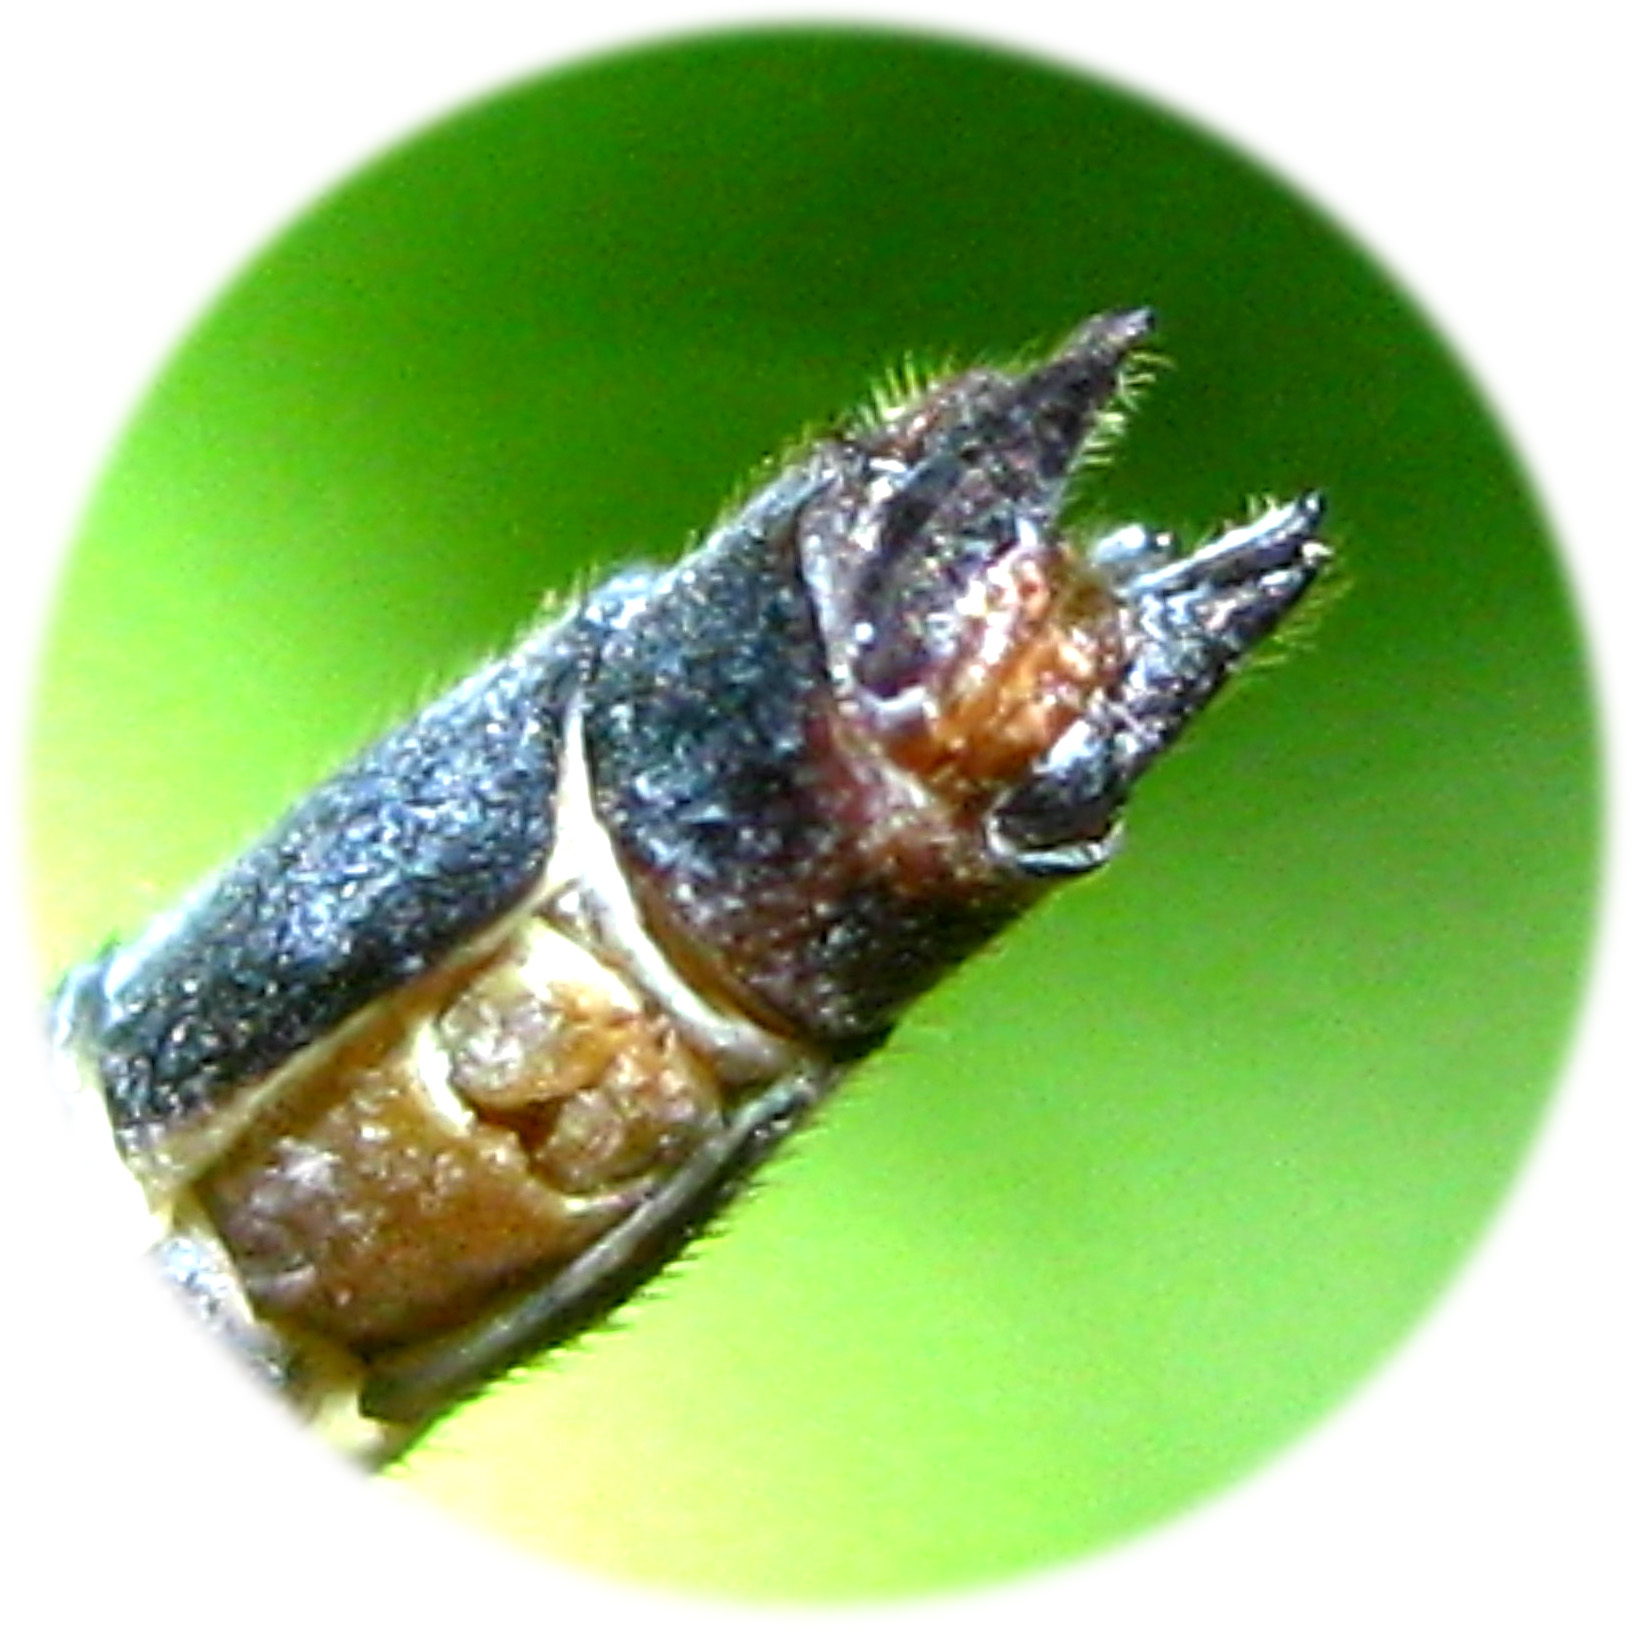 Male anal appendages